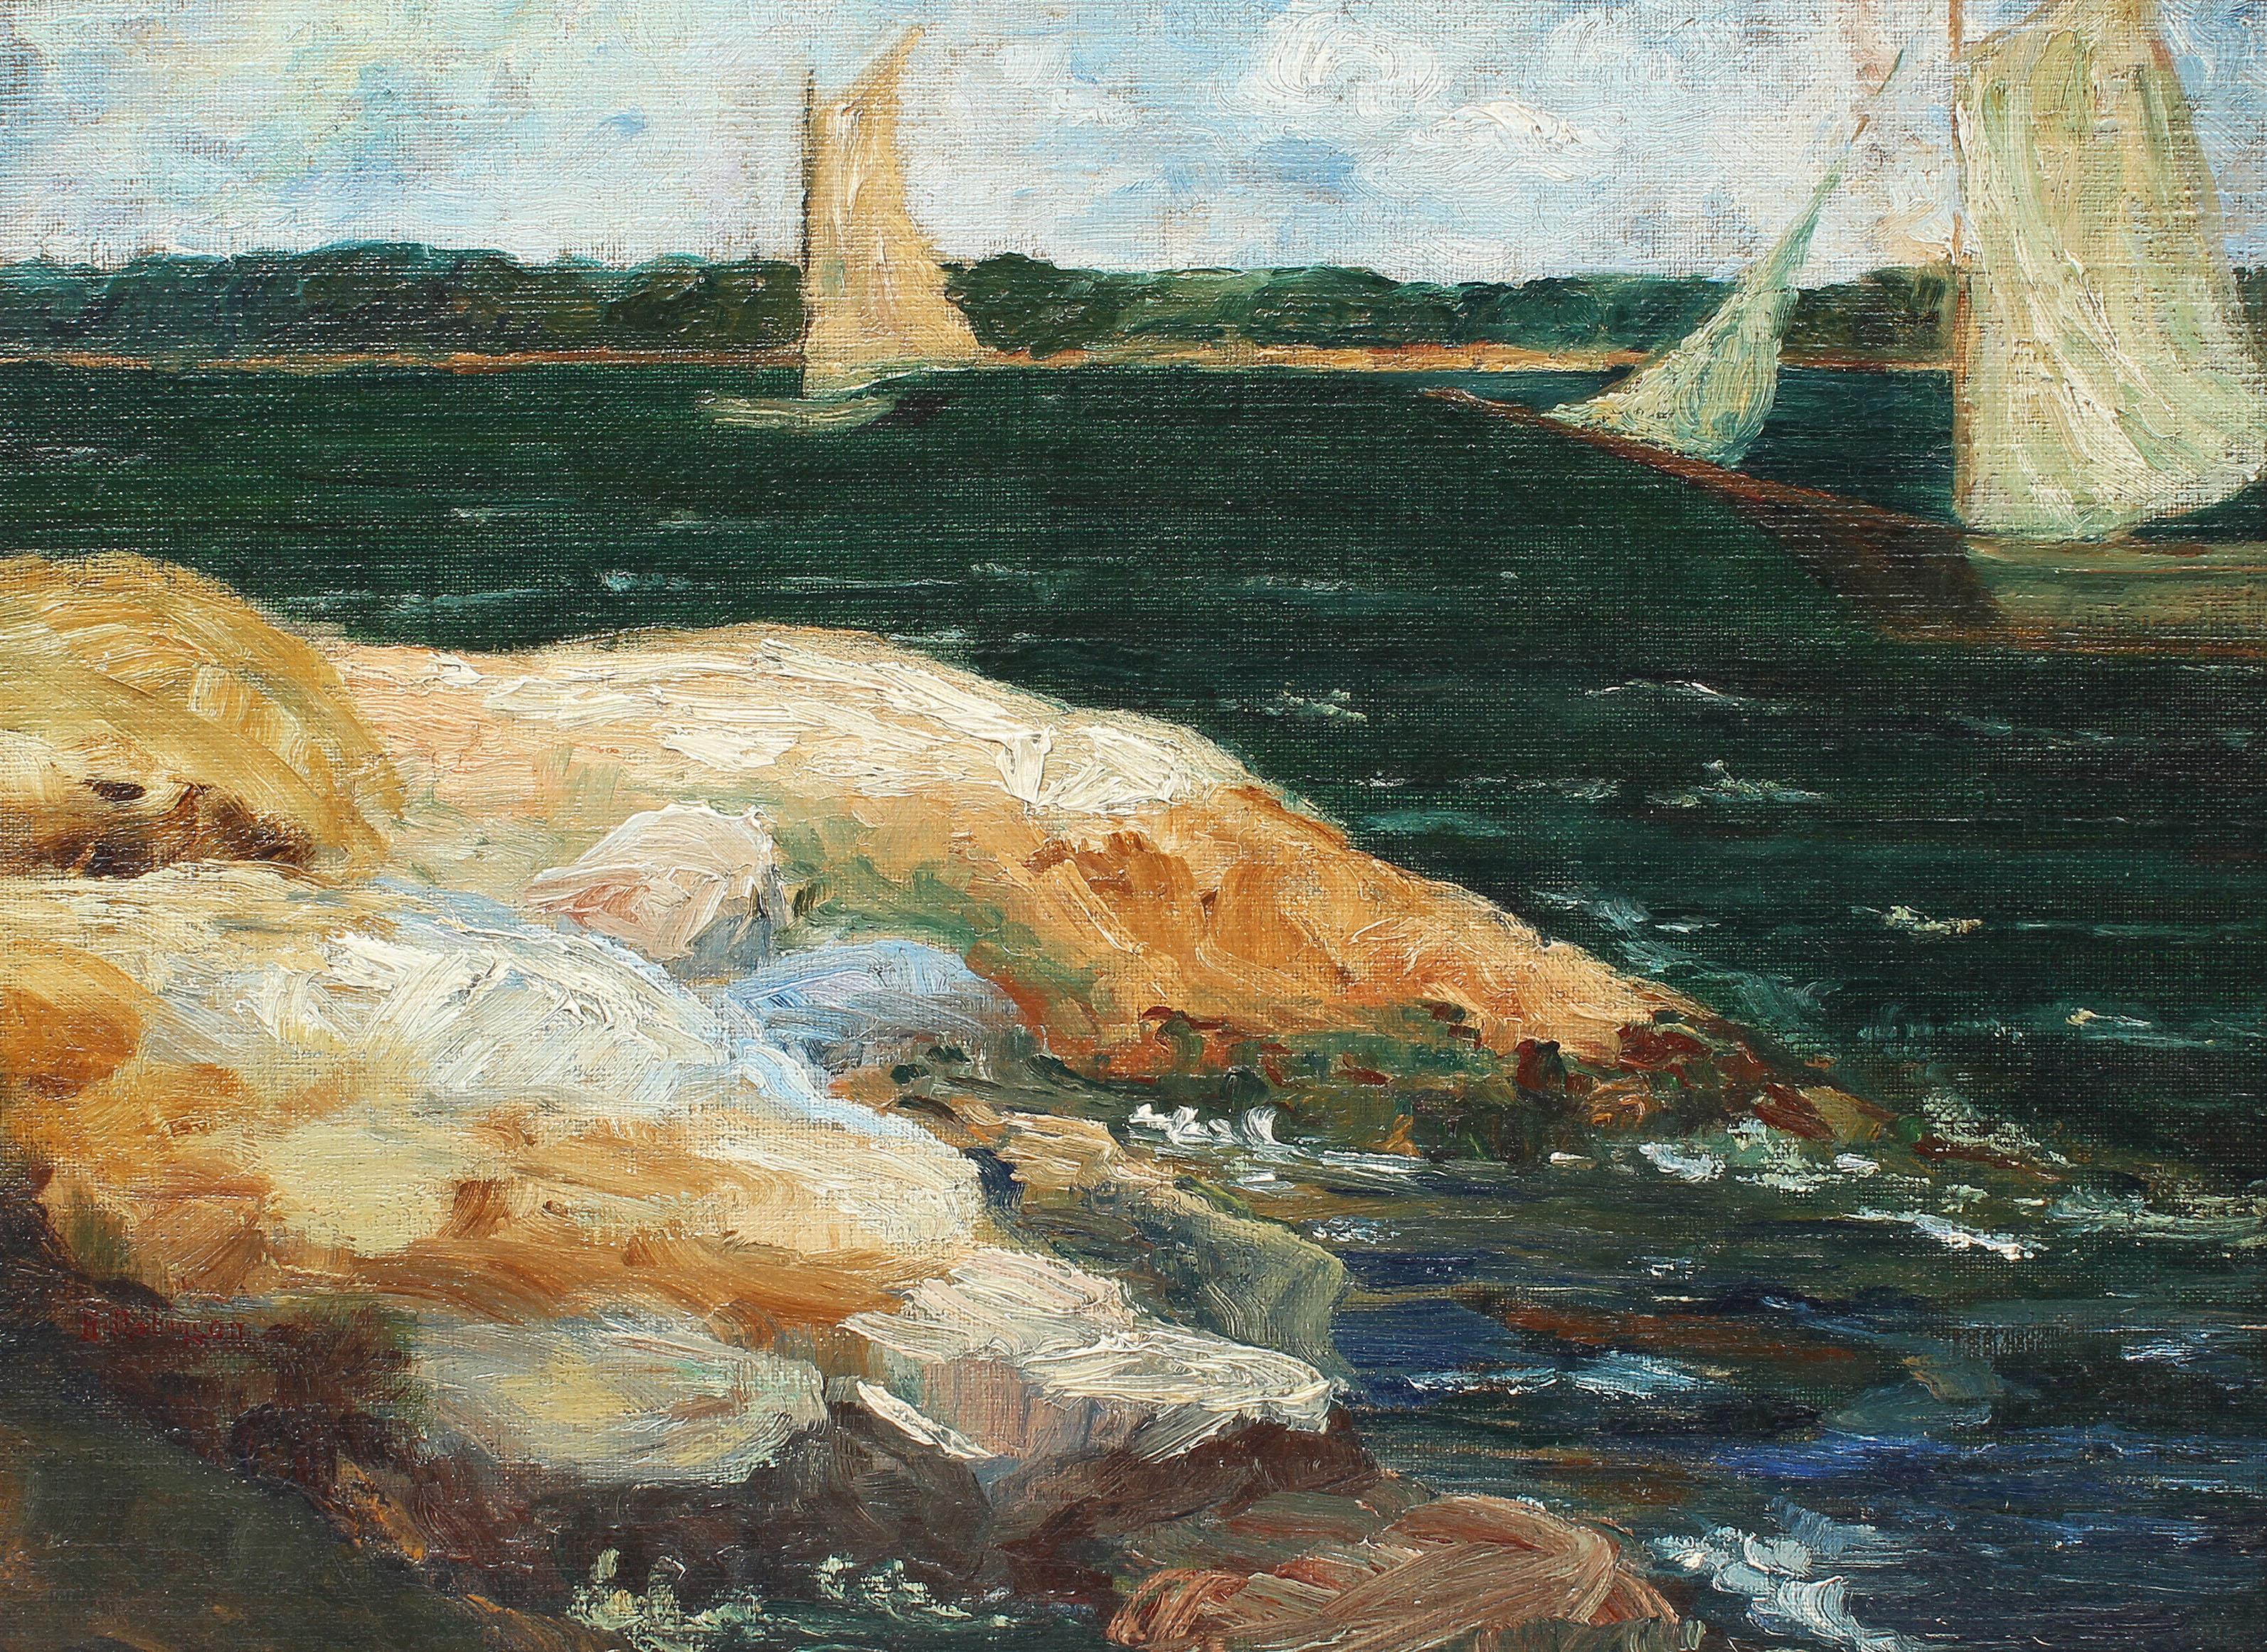 Antique American impressionist coastal landscape oil painting .  Oil on board, circa 1920. No signature found.  Displayed in a period giltwood frame.  Image, 16